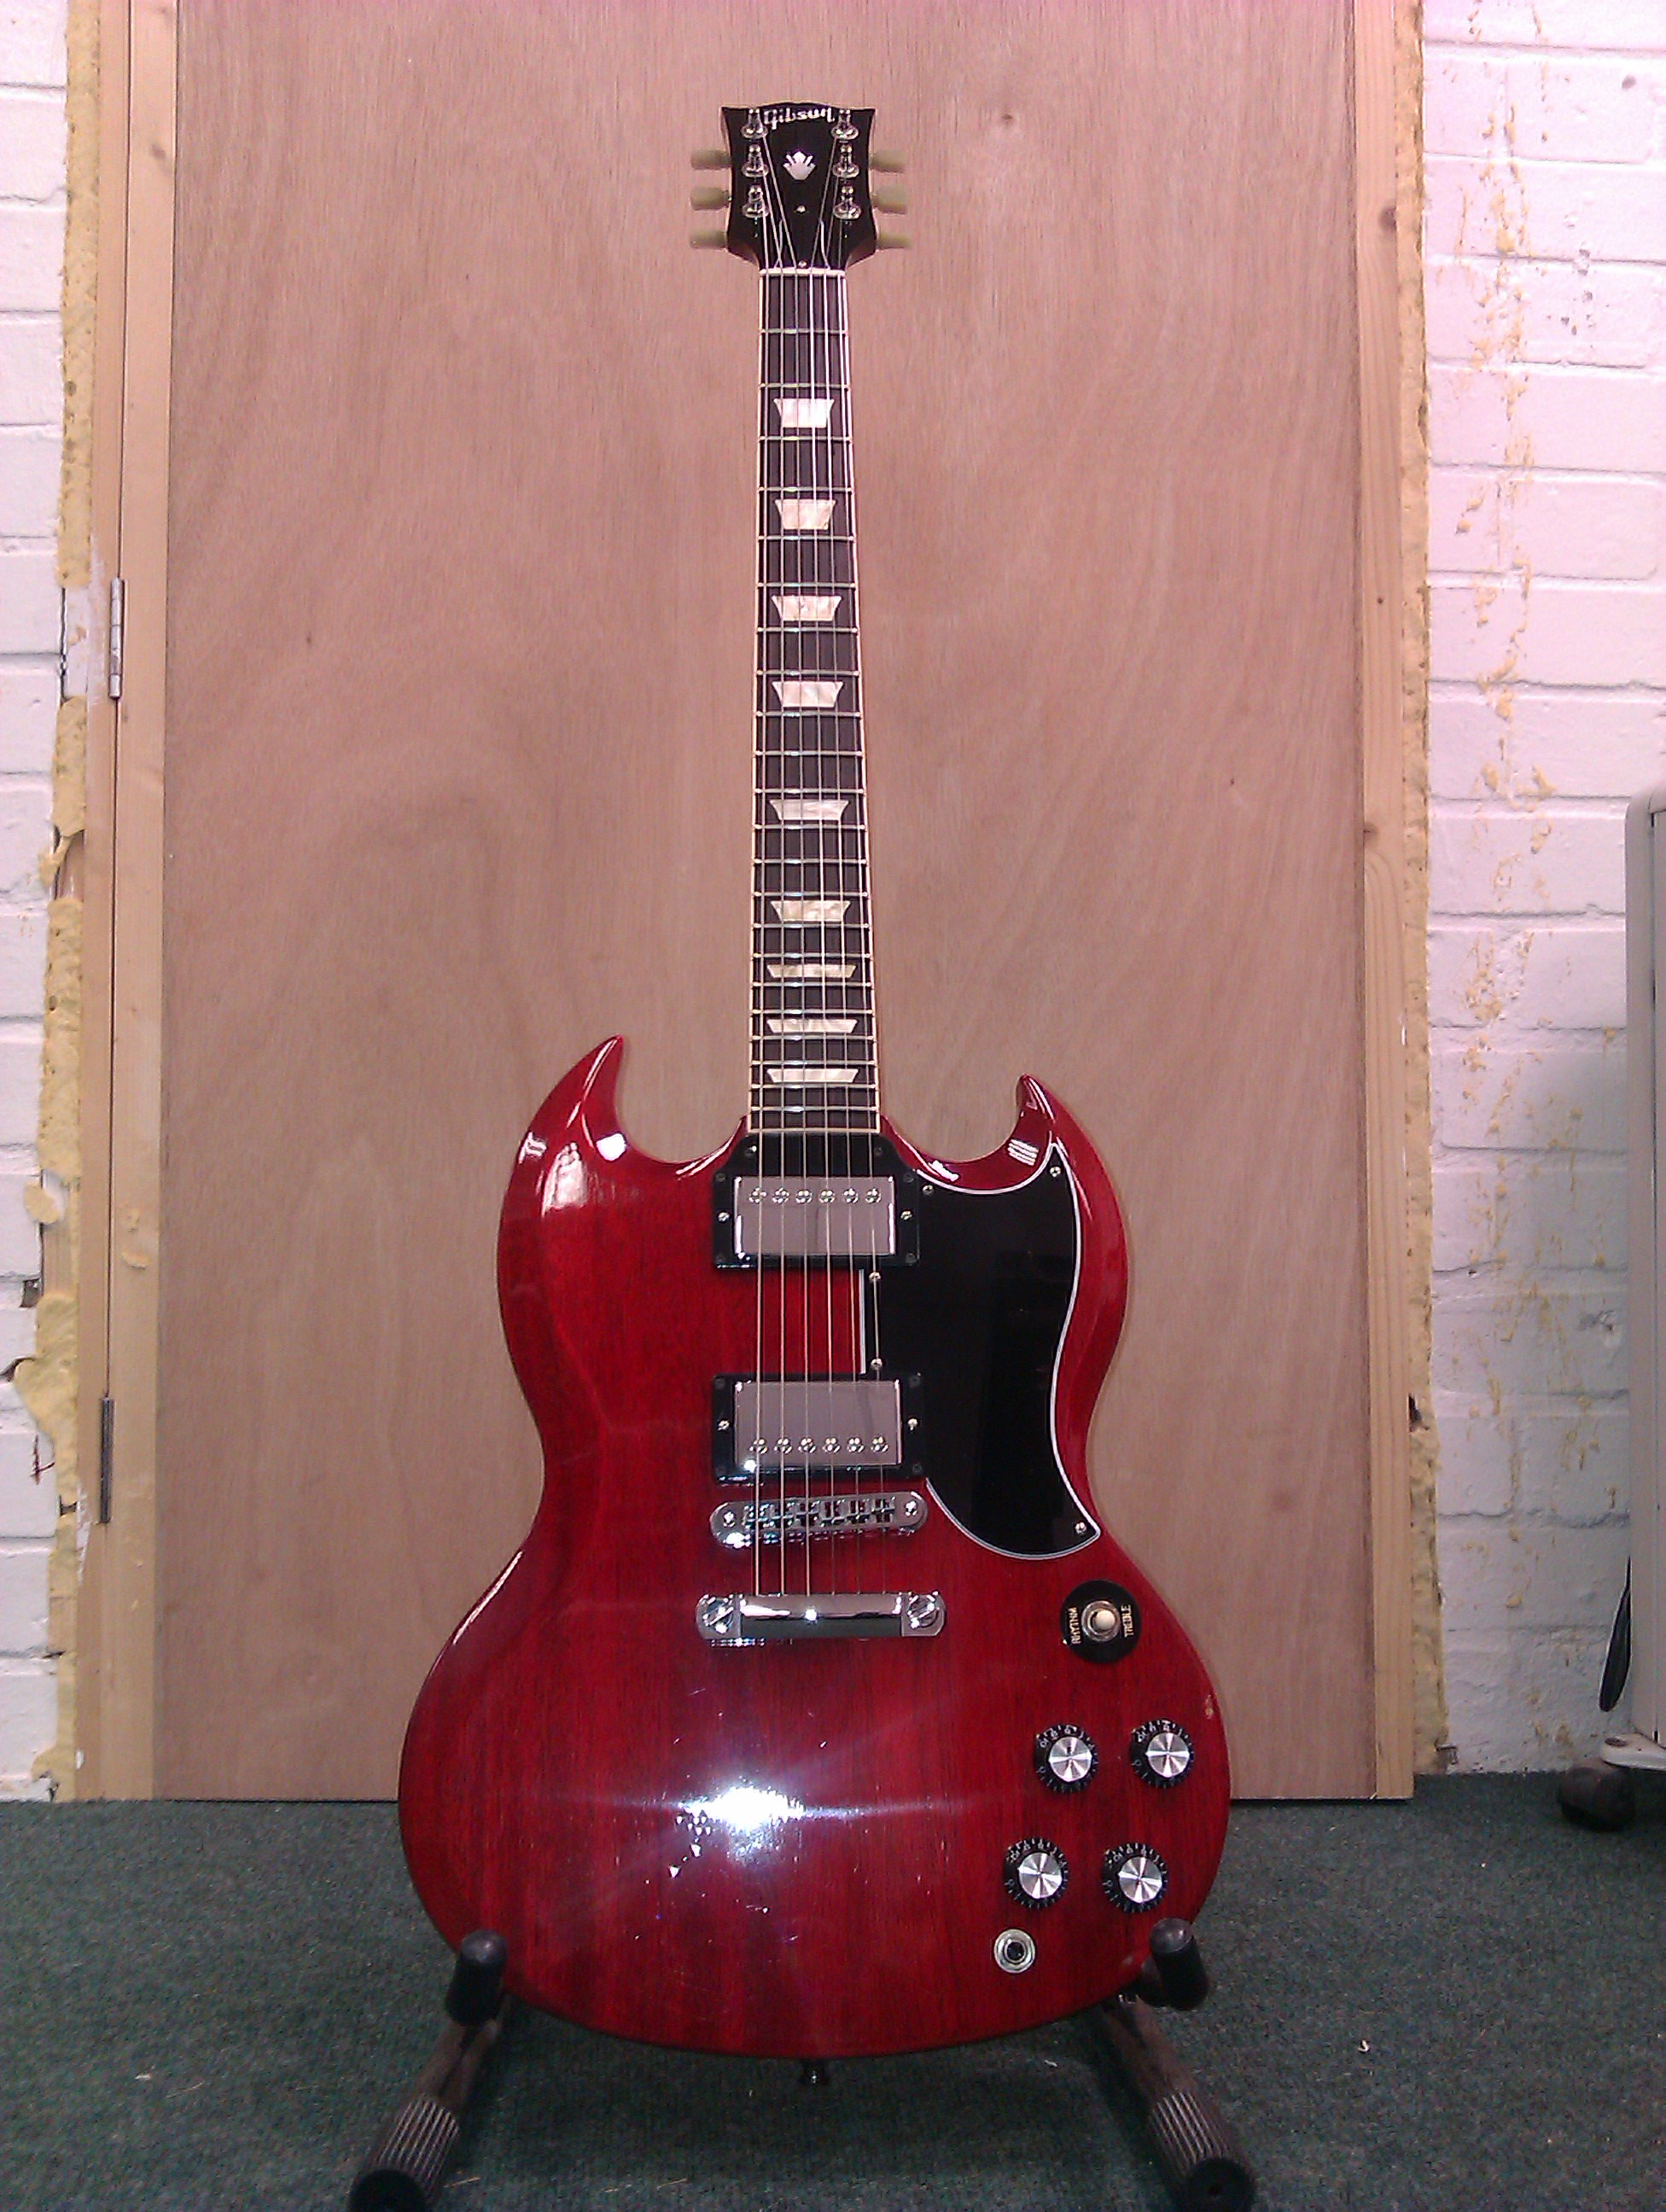 The iconic rock guitar from Gibson